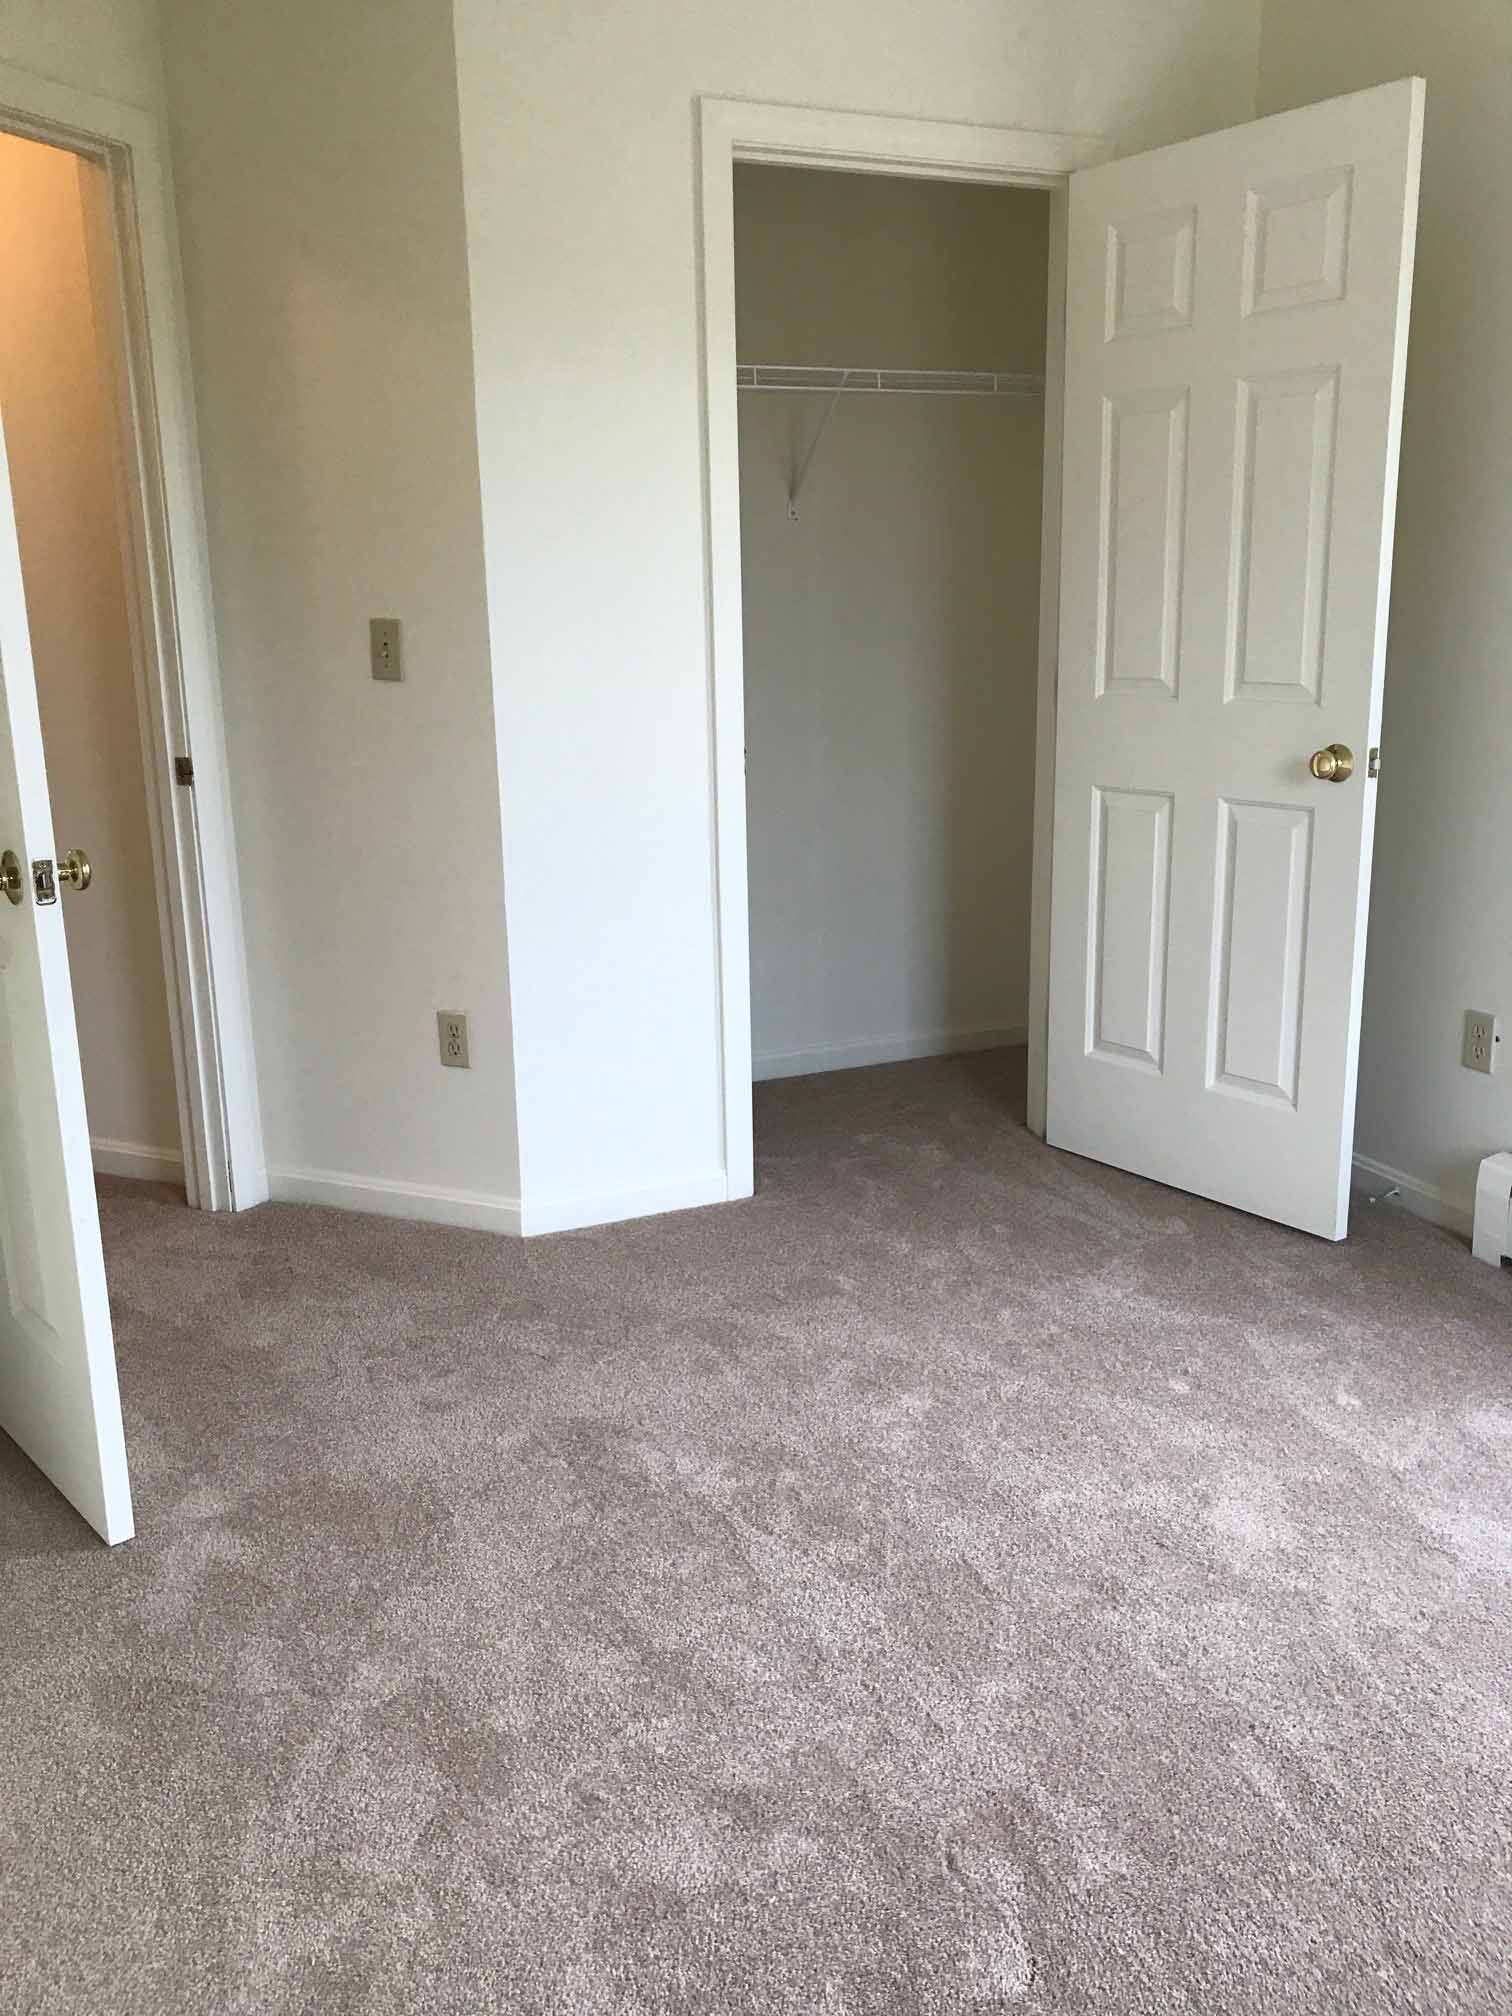 Cohas Overlook bedroom closet view by Socha Companies is a quality townhouse community in Manchester, NH